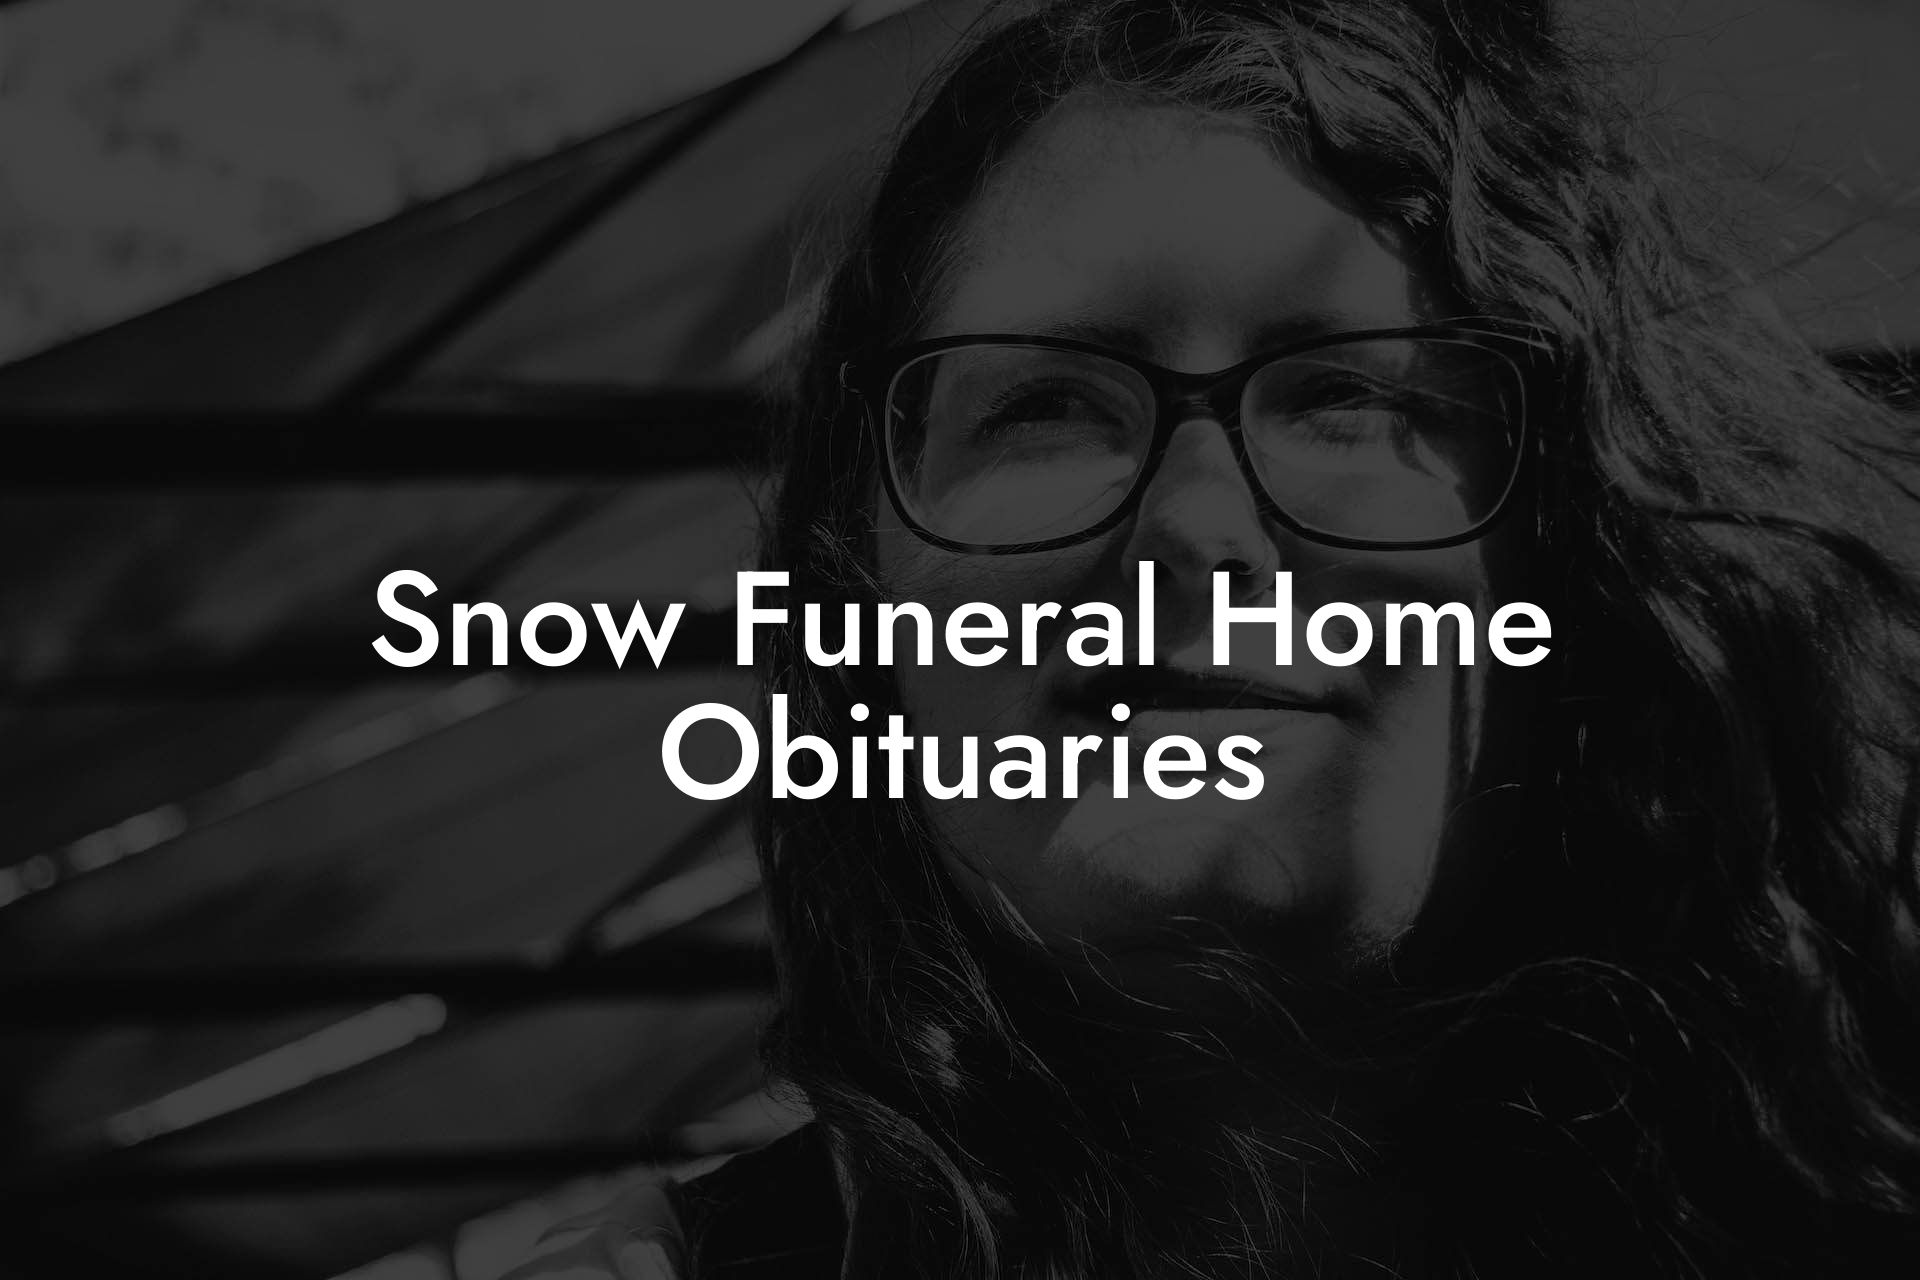 Snow Funeral Home Obituaries